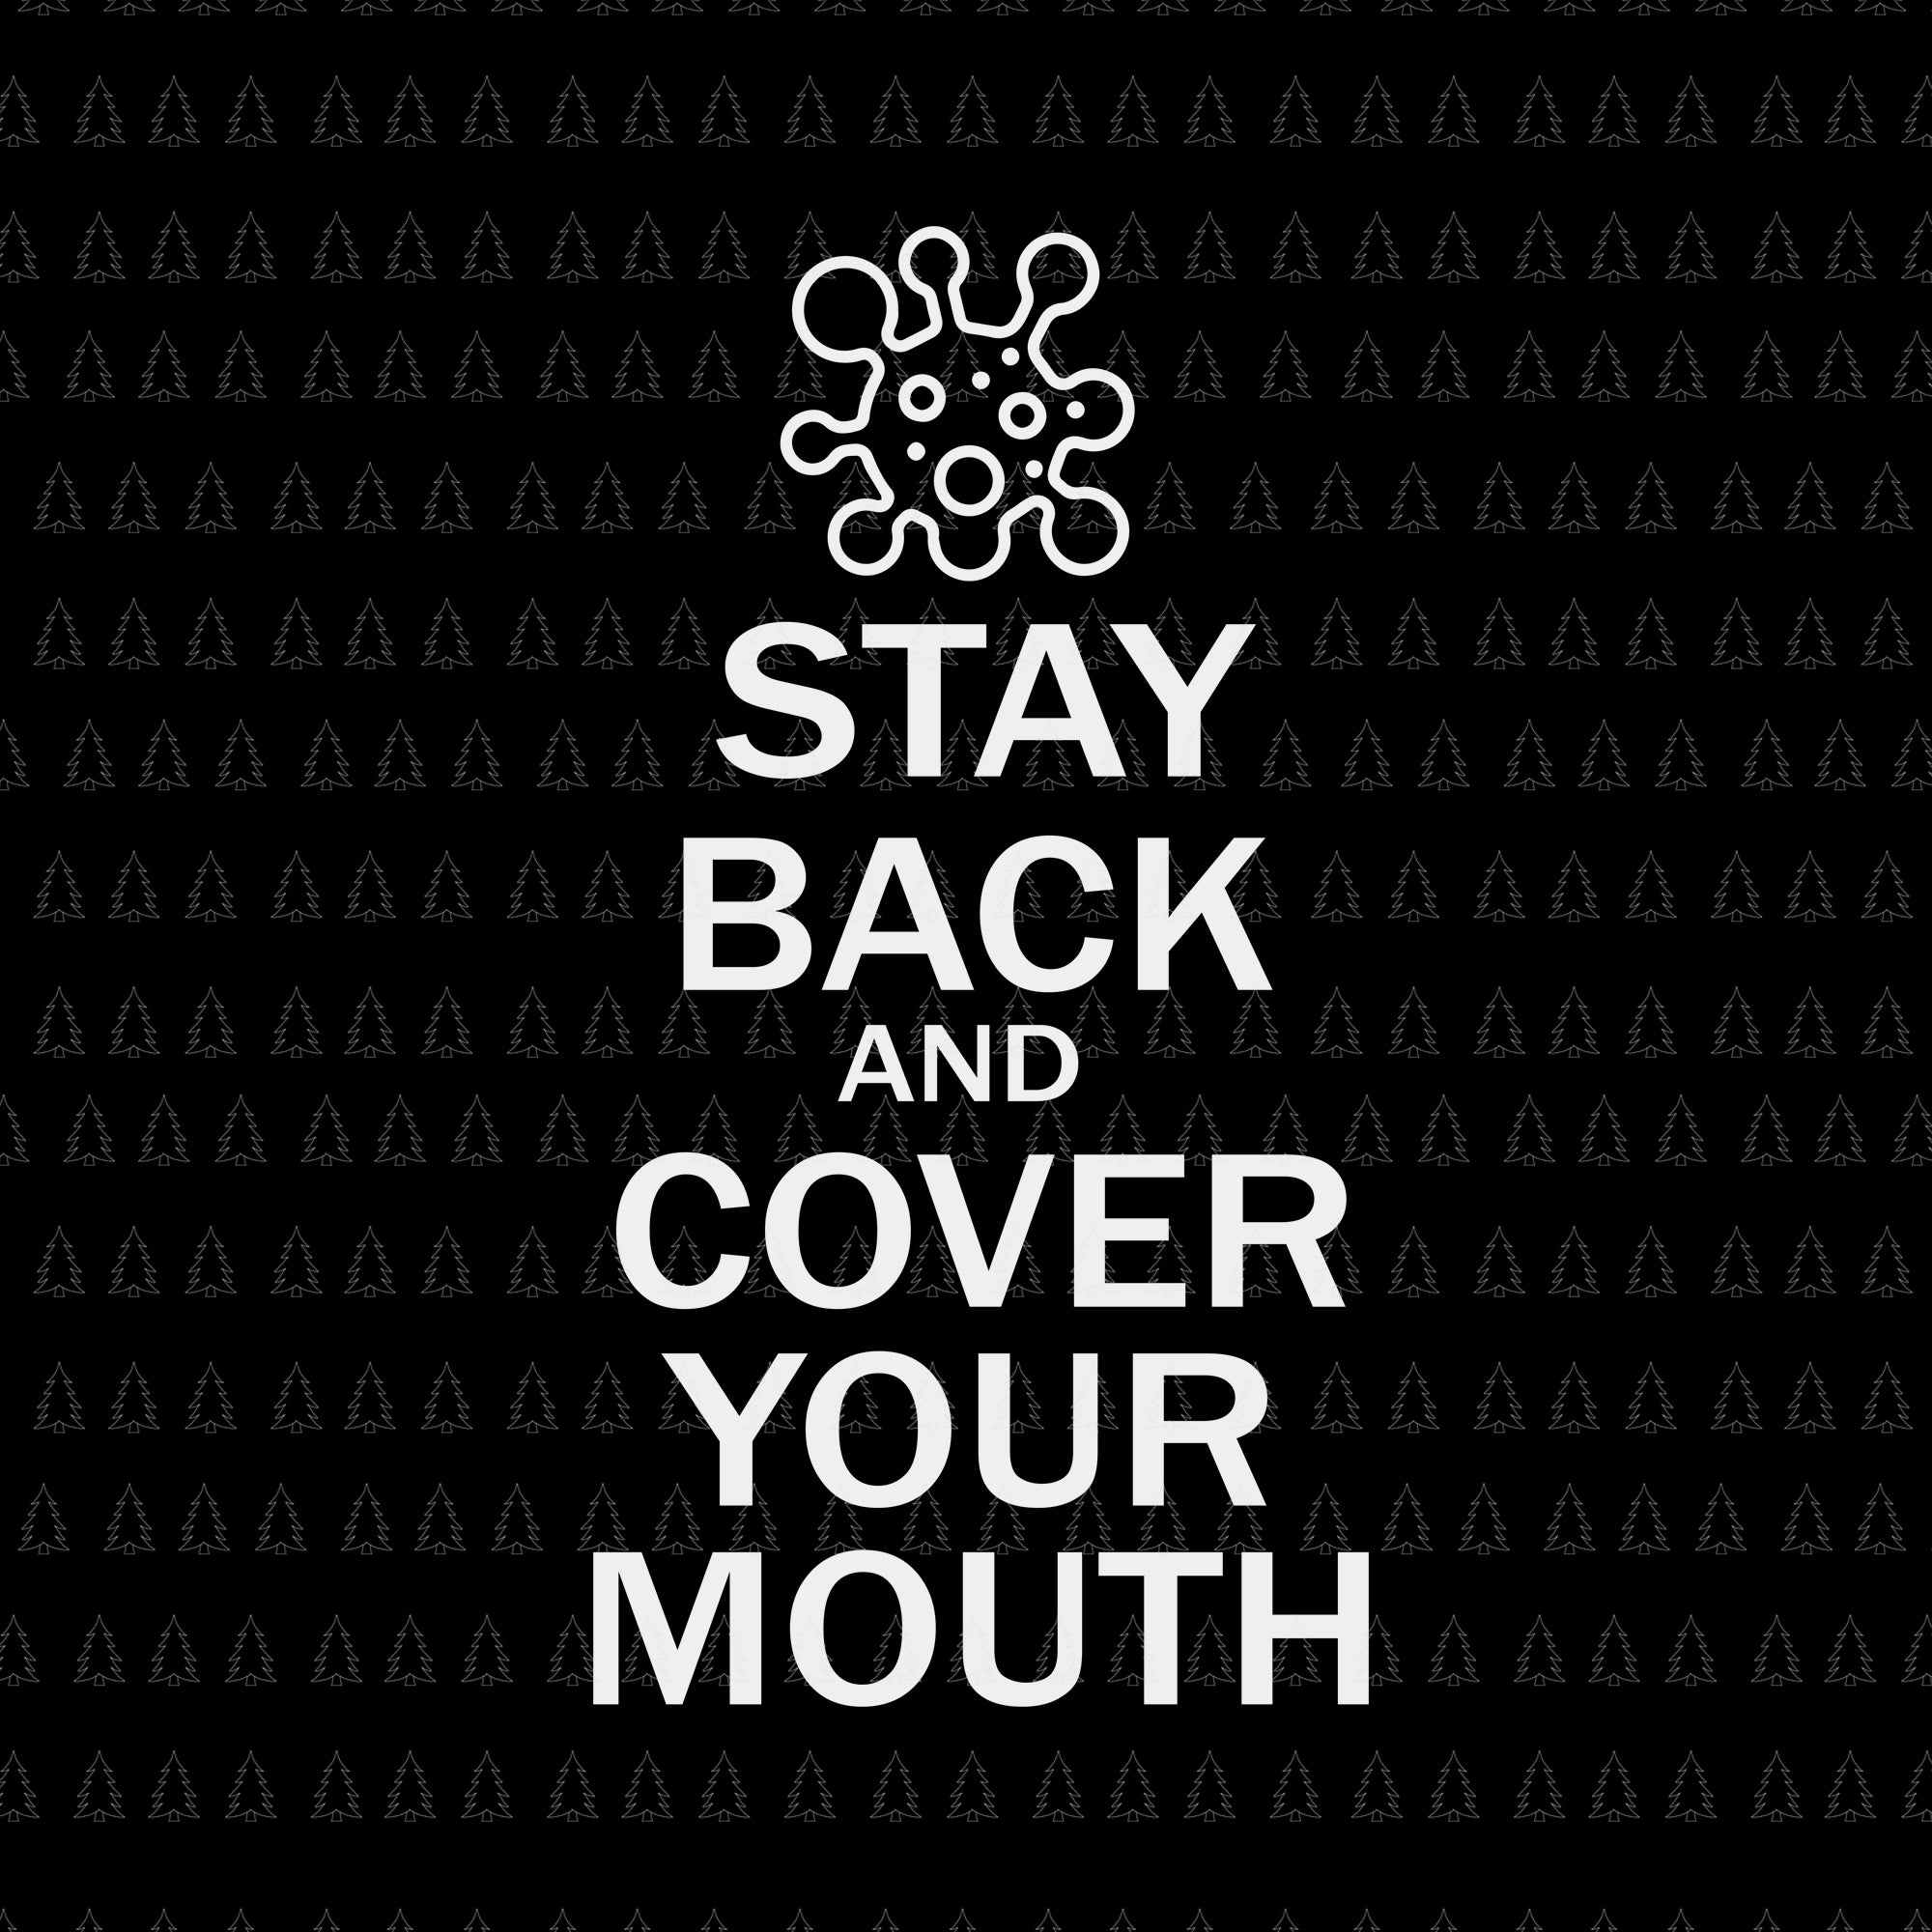 Stay back and cover your mouth svg, stay back and cover your mouth, stay back and cover your mouth png, eps, dxf, svg file